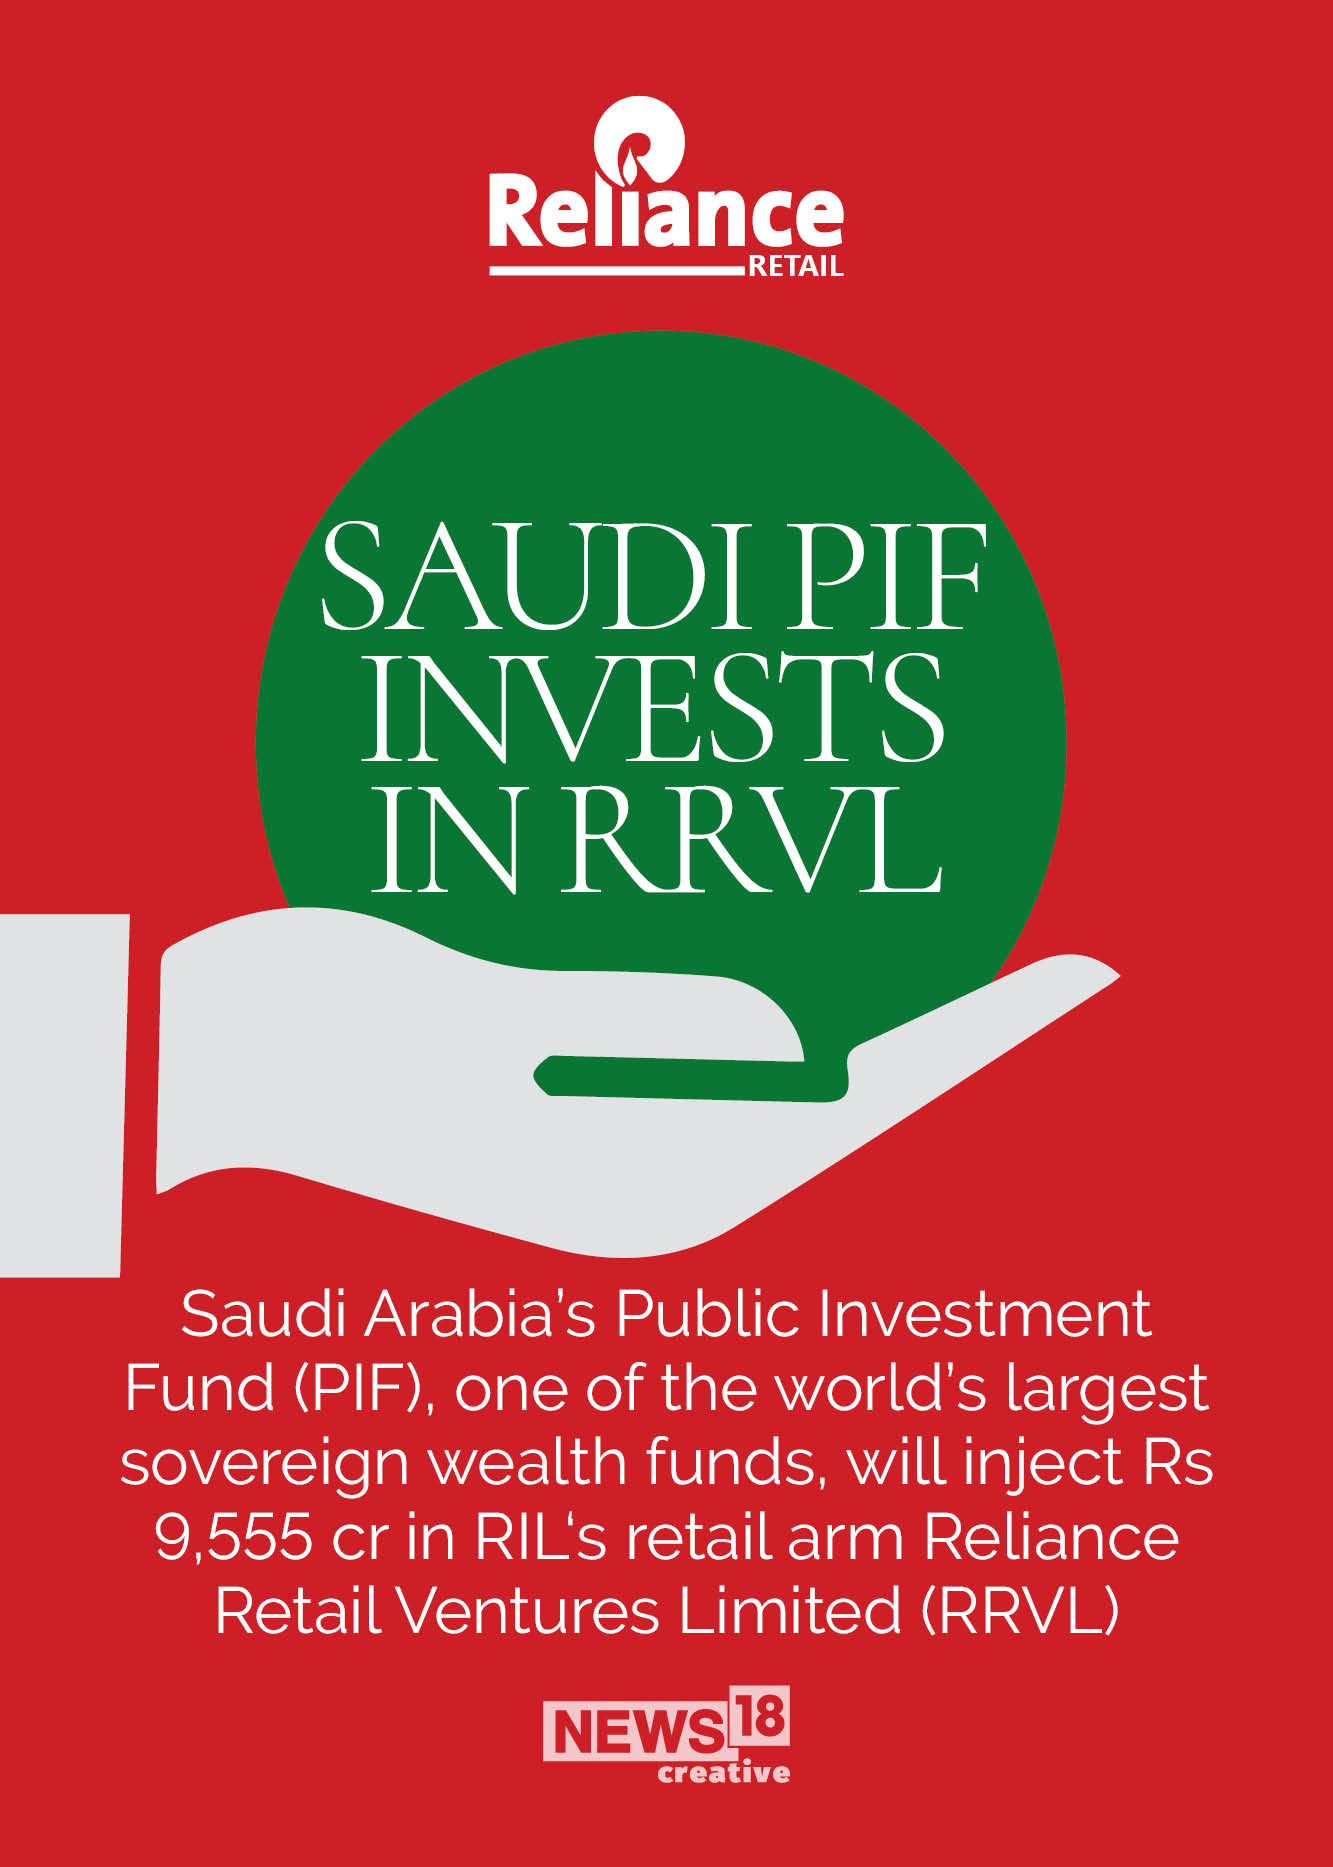 Saudi fund is the newest investor in Reliance Retail